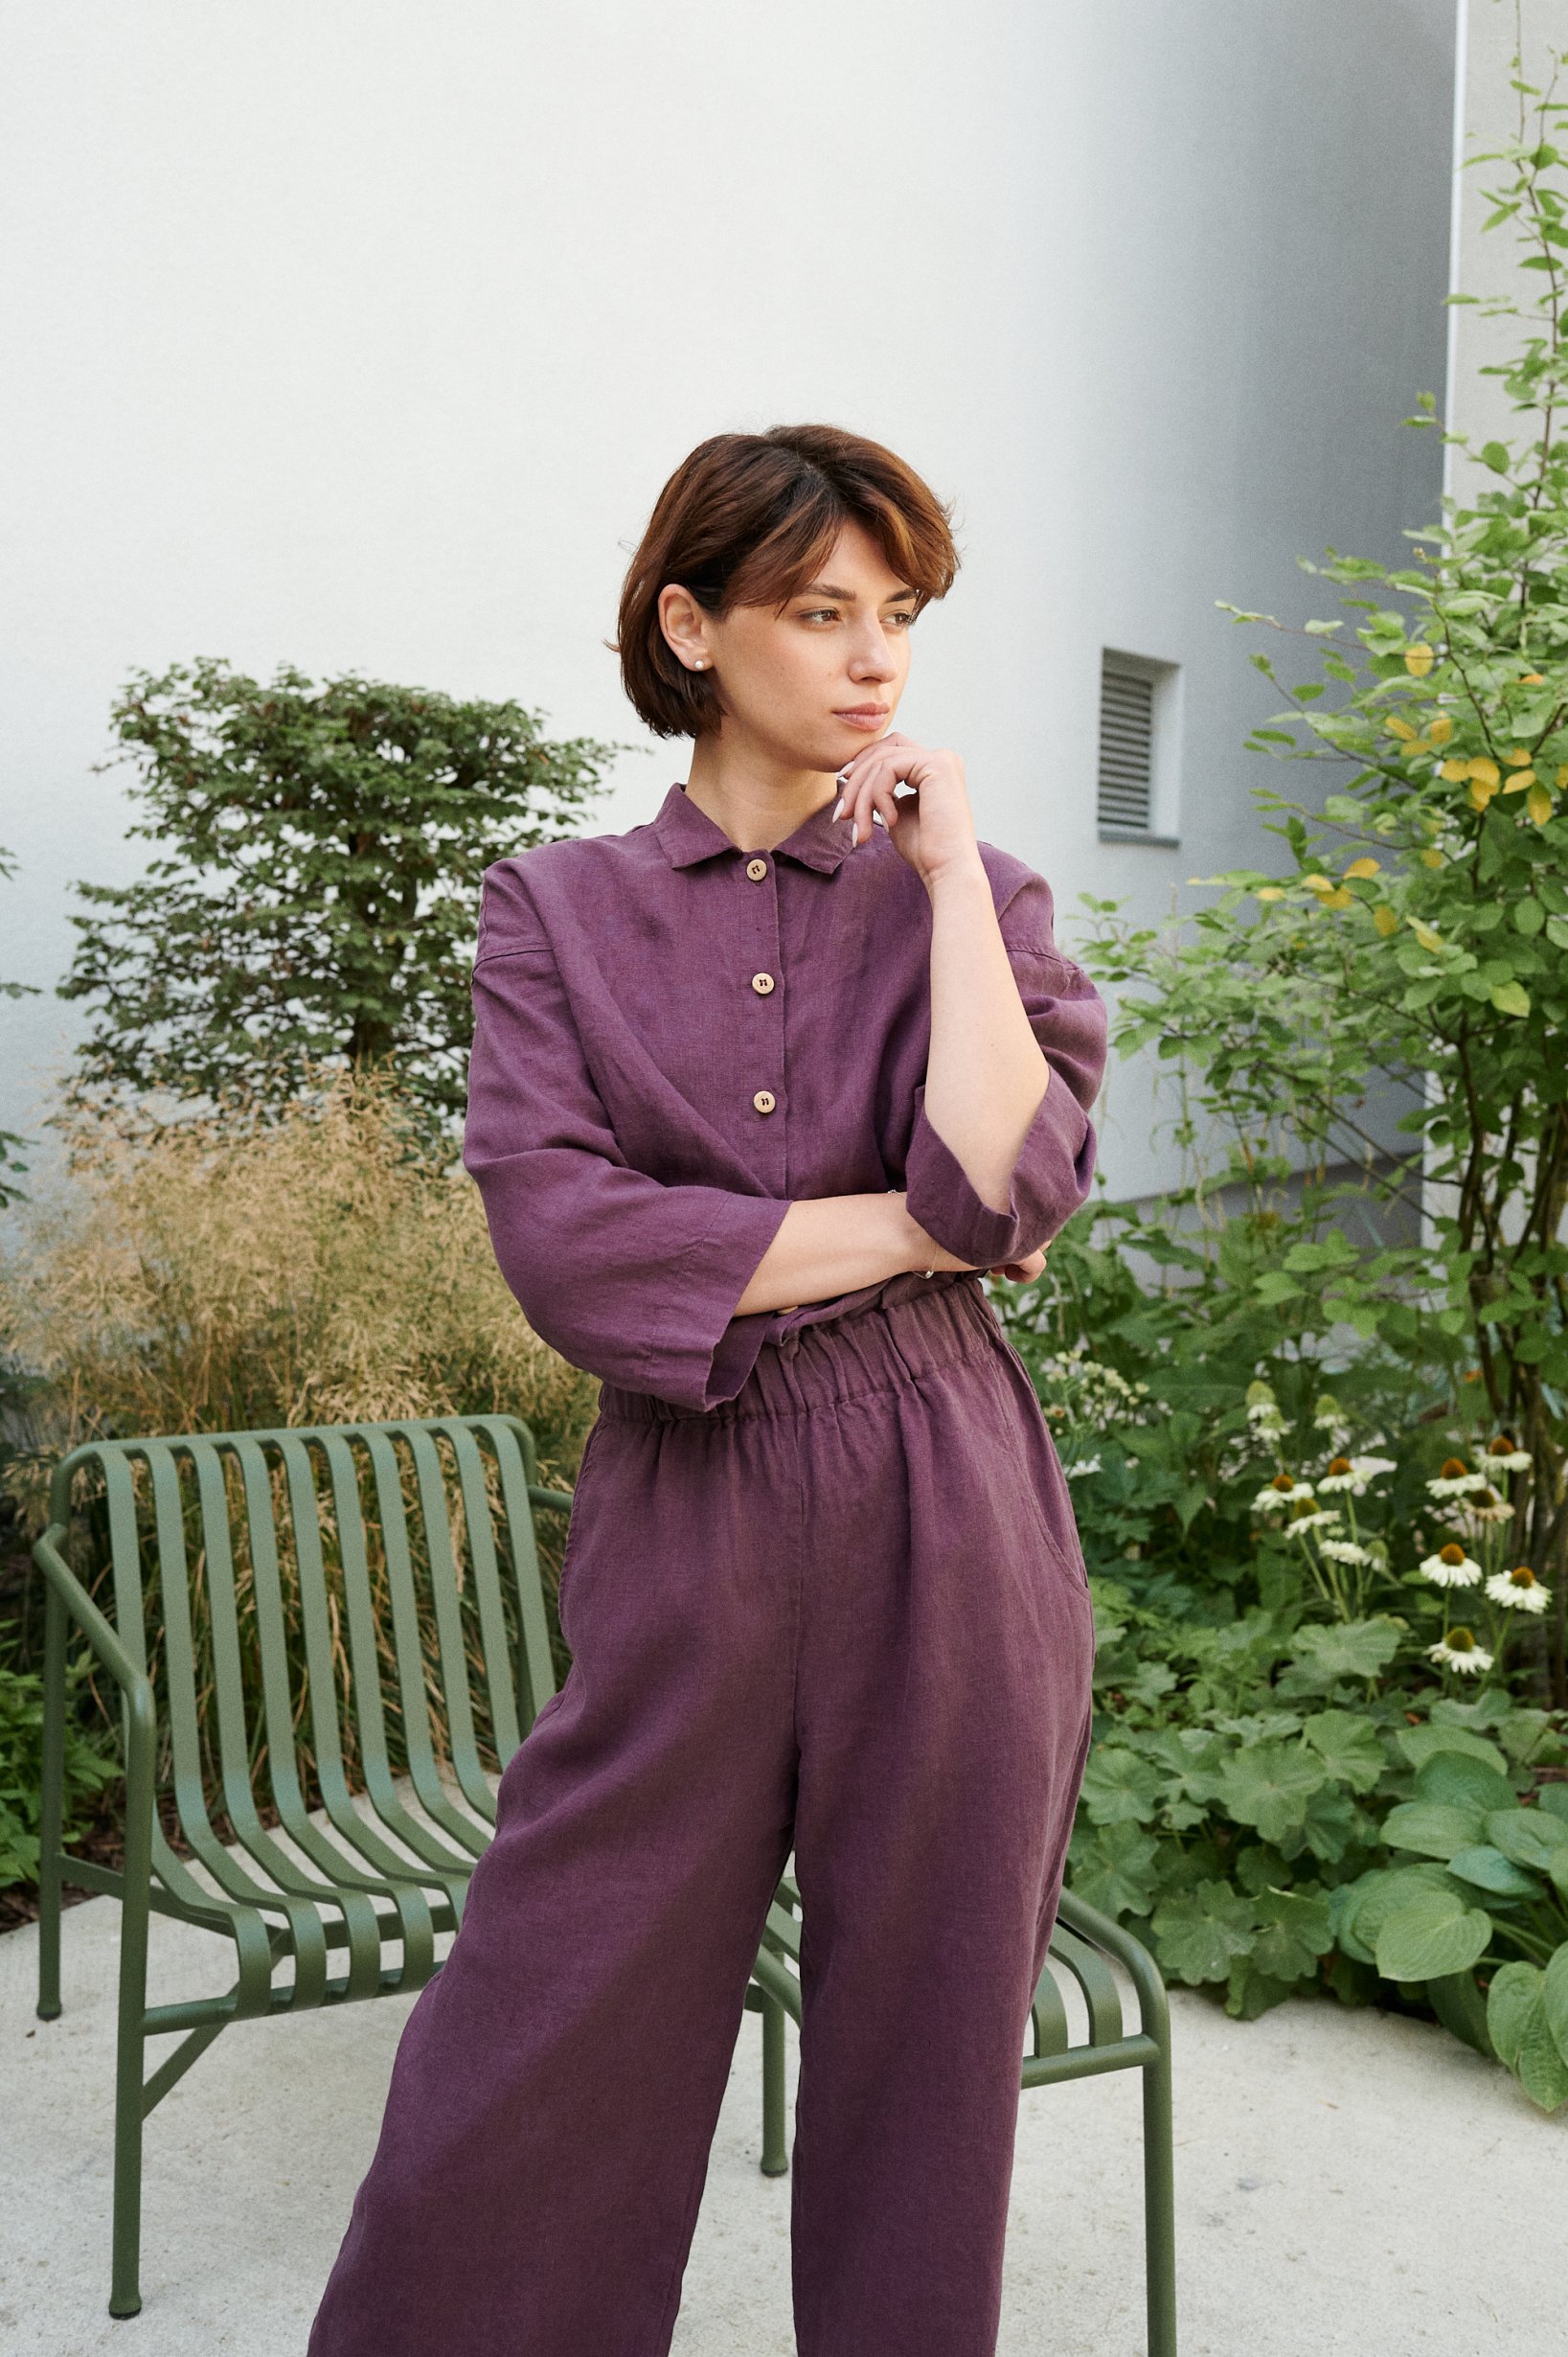 A model wearing a violet linen jumpsuit with an elasticated waist and wooden buttons